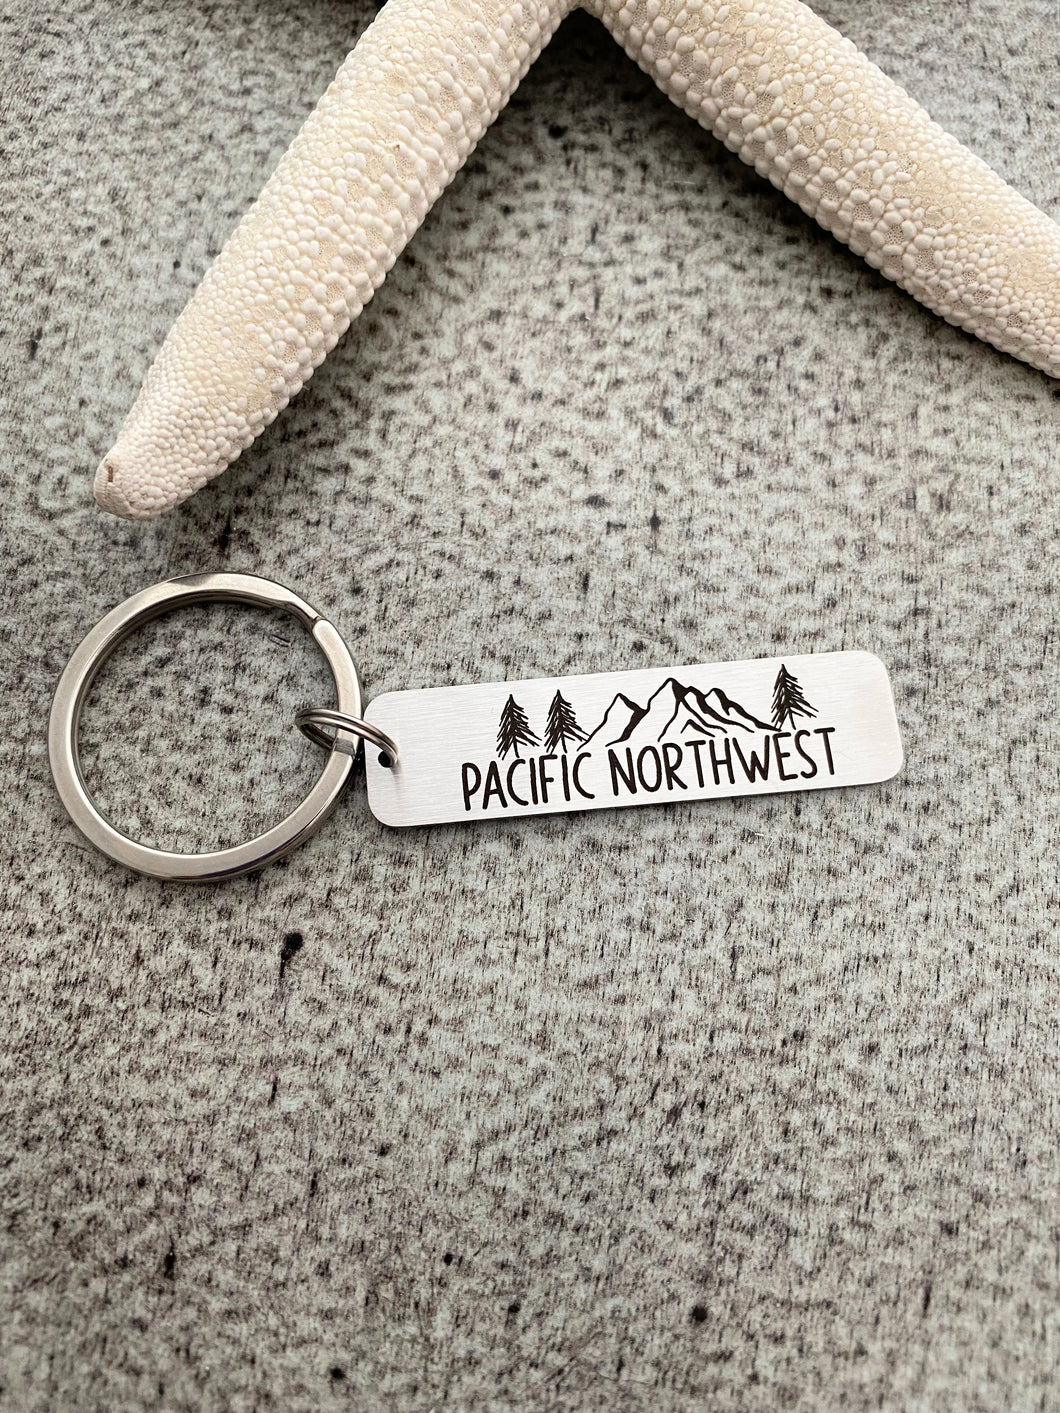 Pacific Northwest Keychain - Stainless steel engraved Bar Key Chain - PNW Trees and Mountains